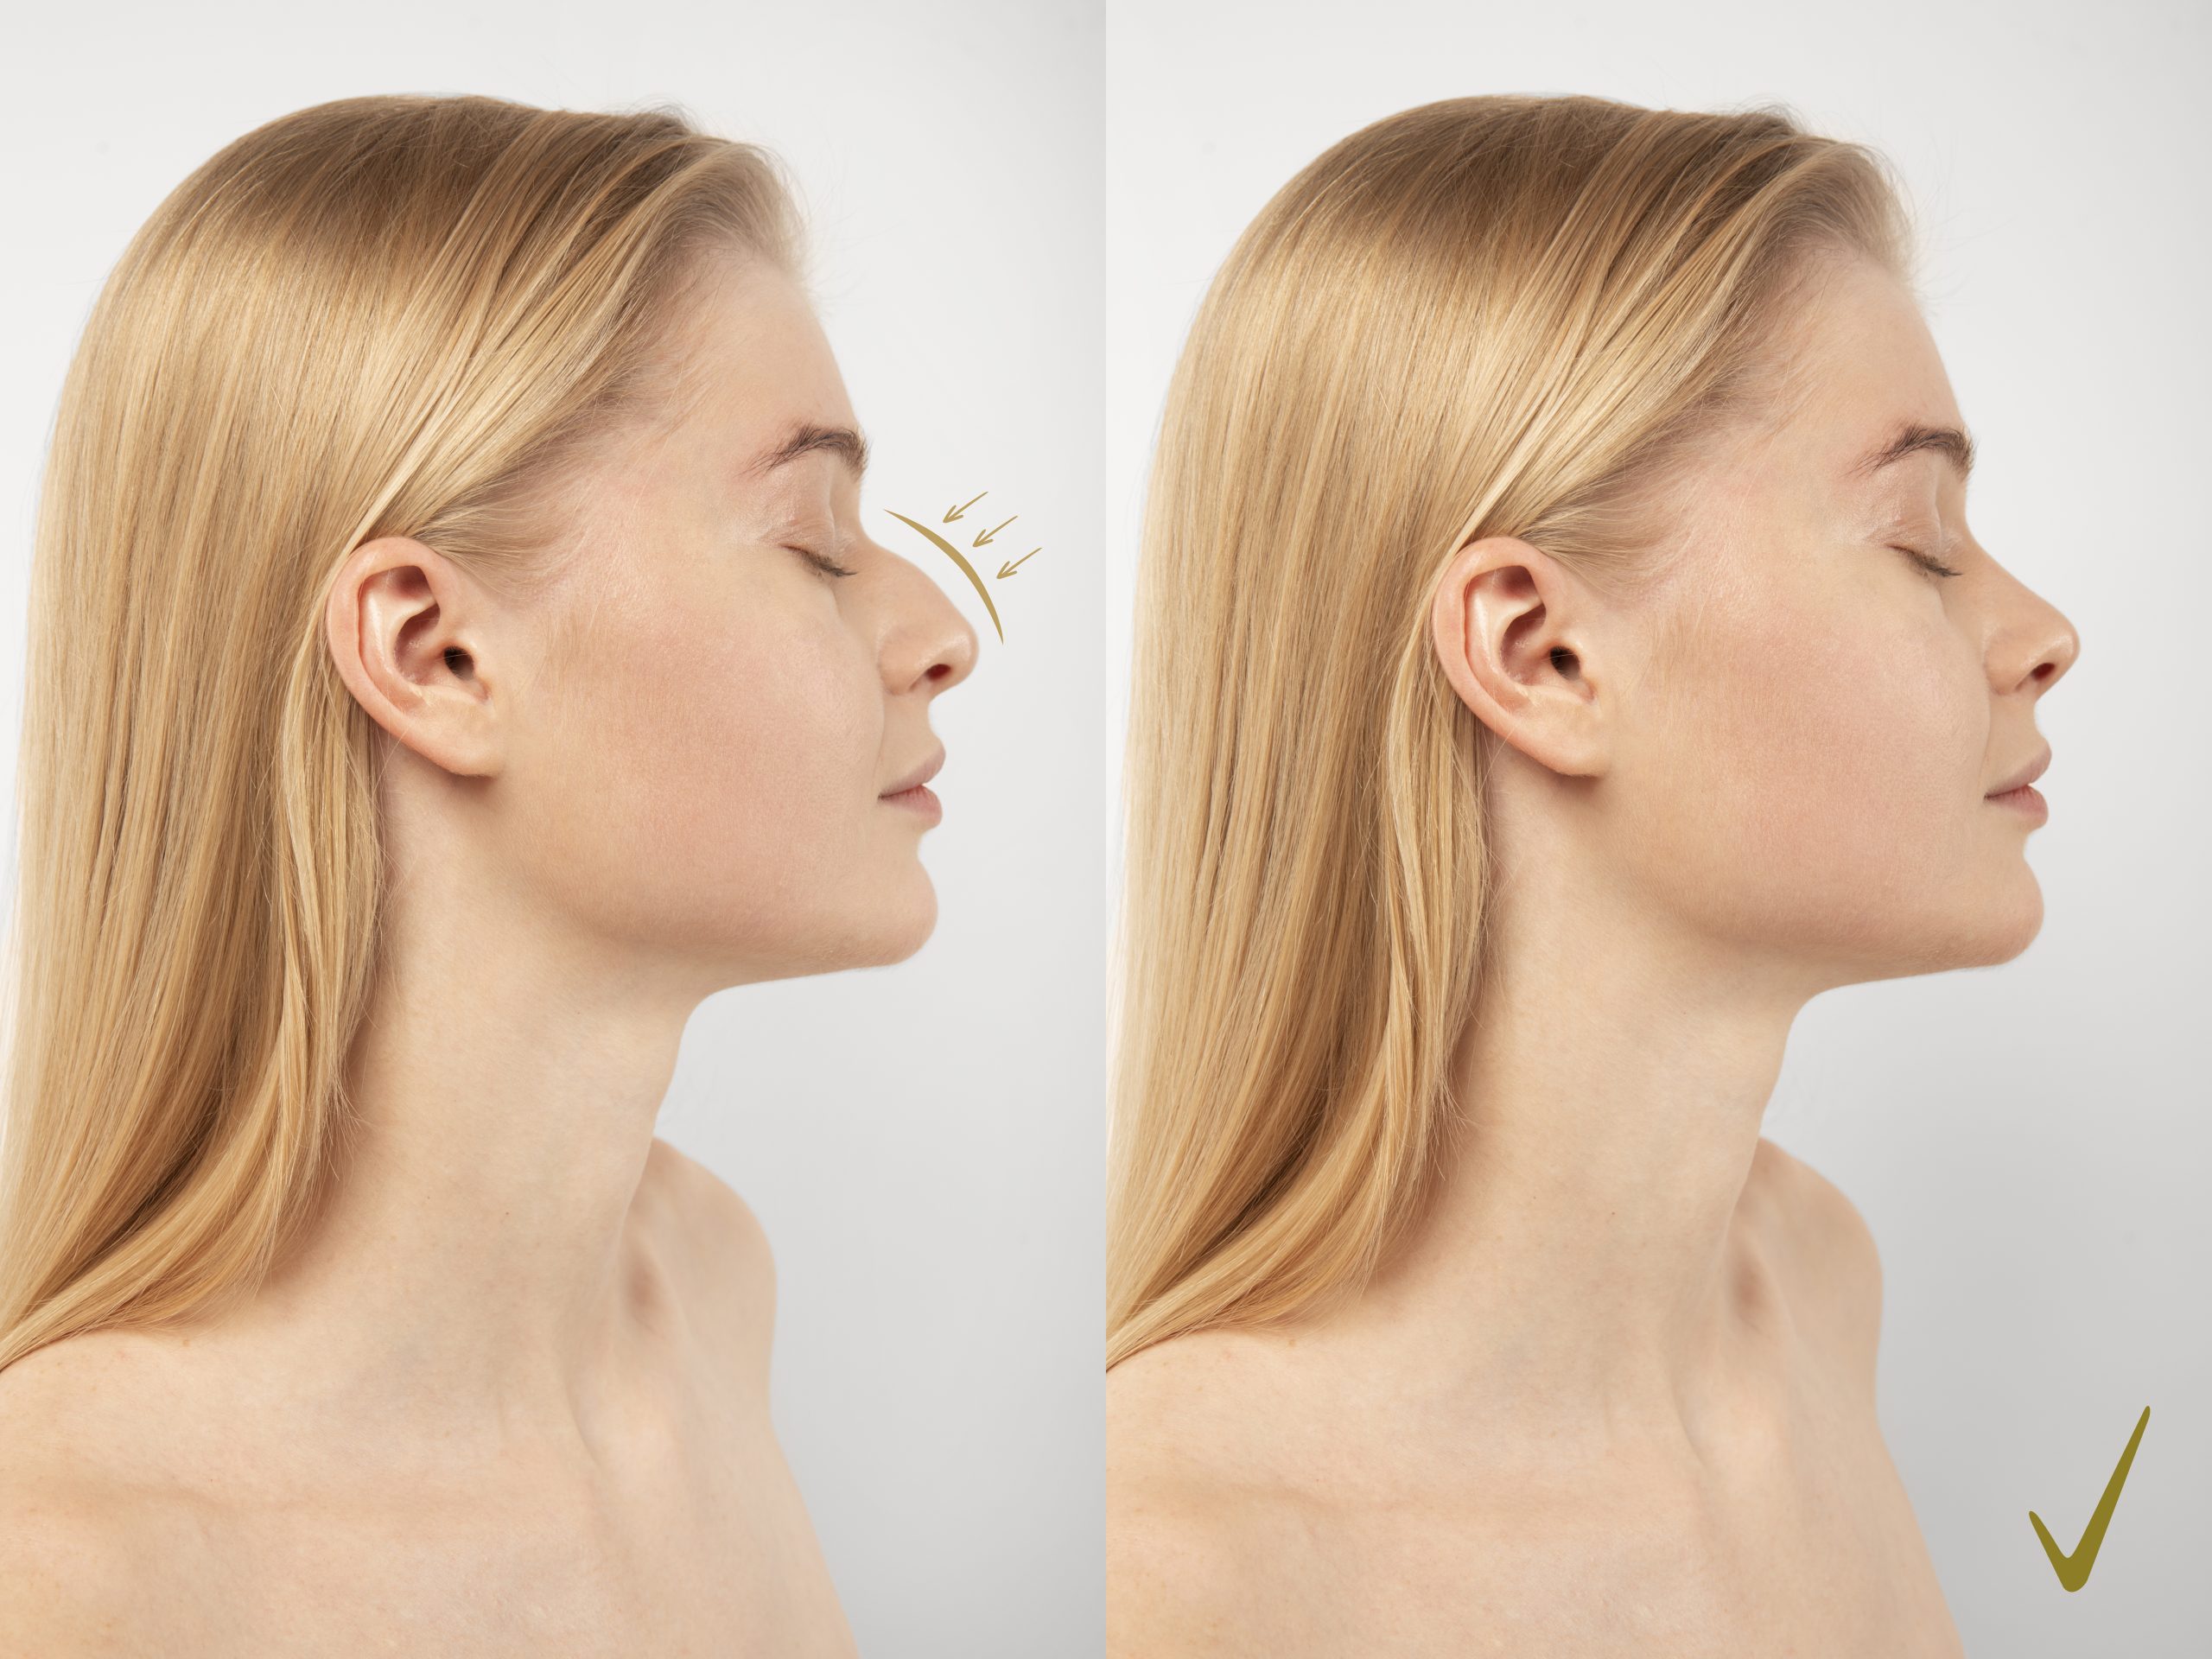 woman-getting-ready-nose-job-surgery